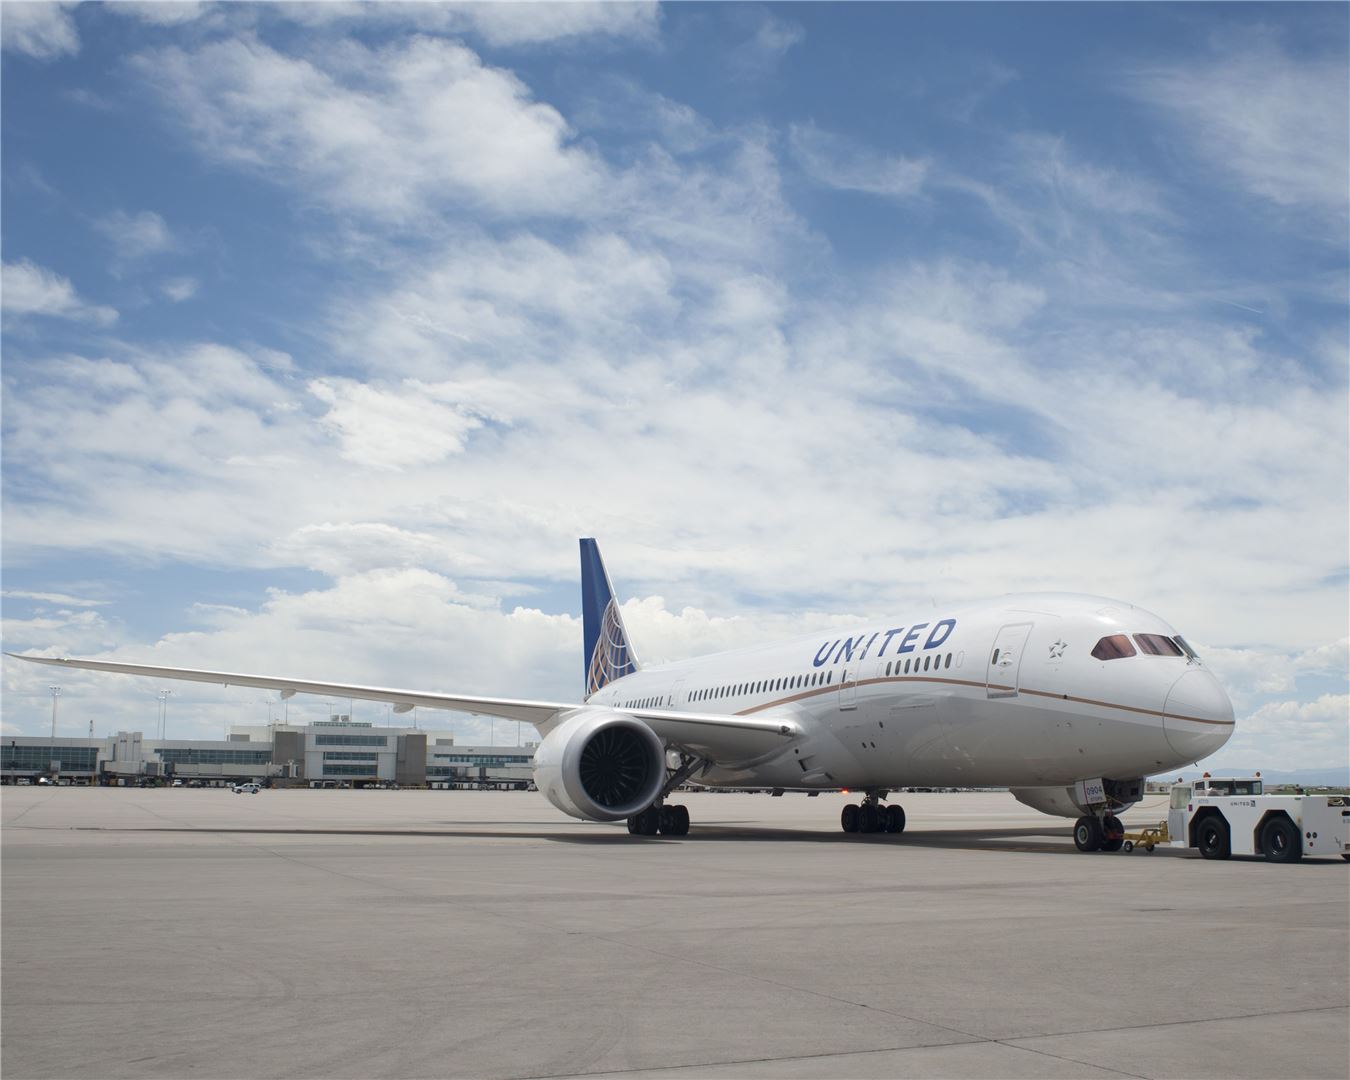 United Airlines Joins JetBlue, Others in Raising Bag Fees